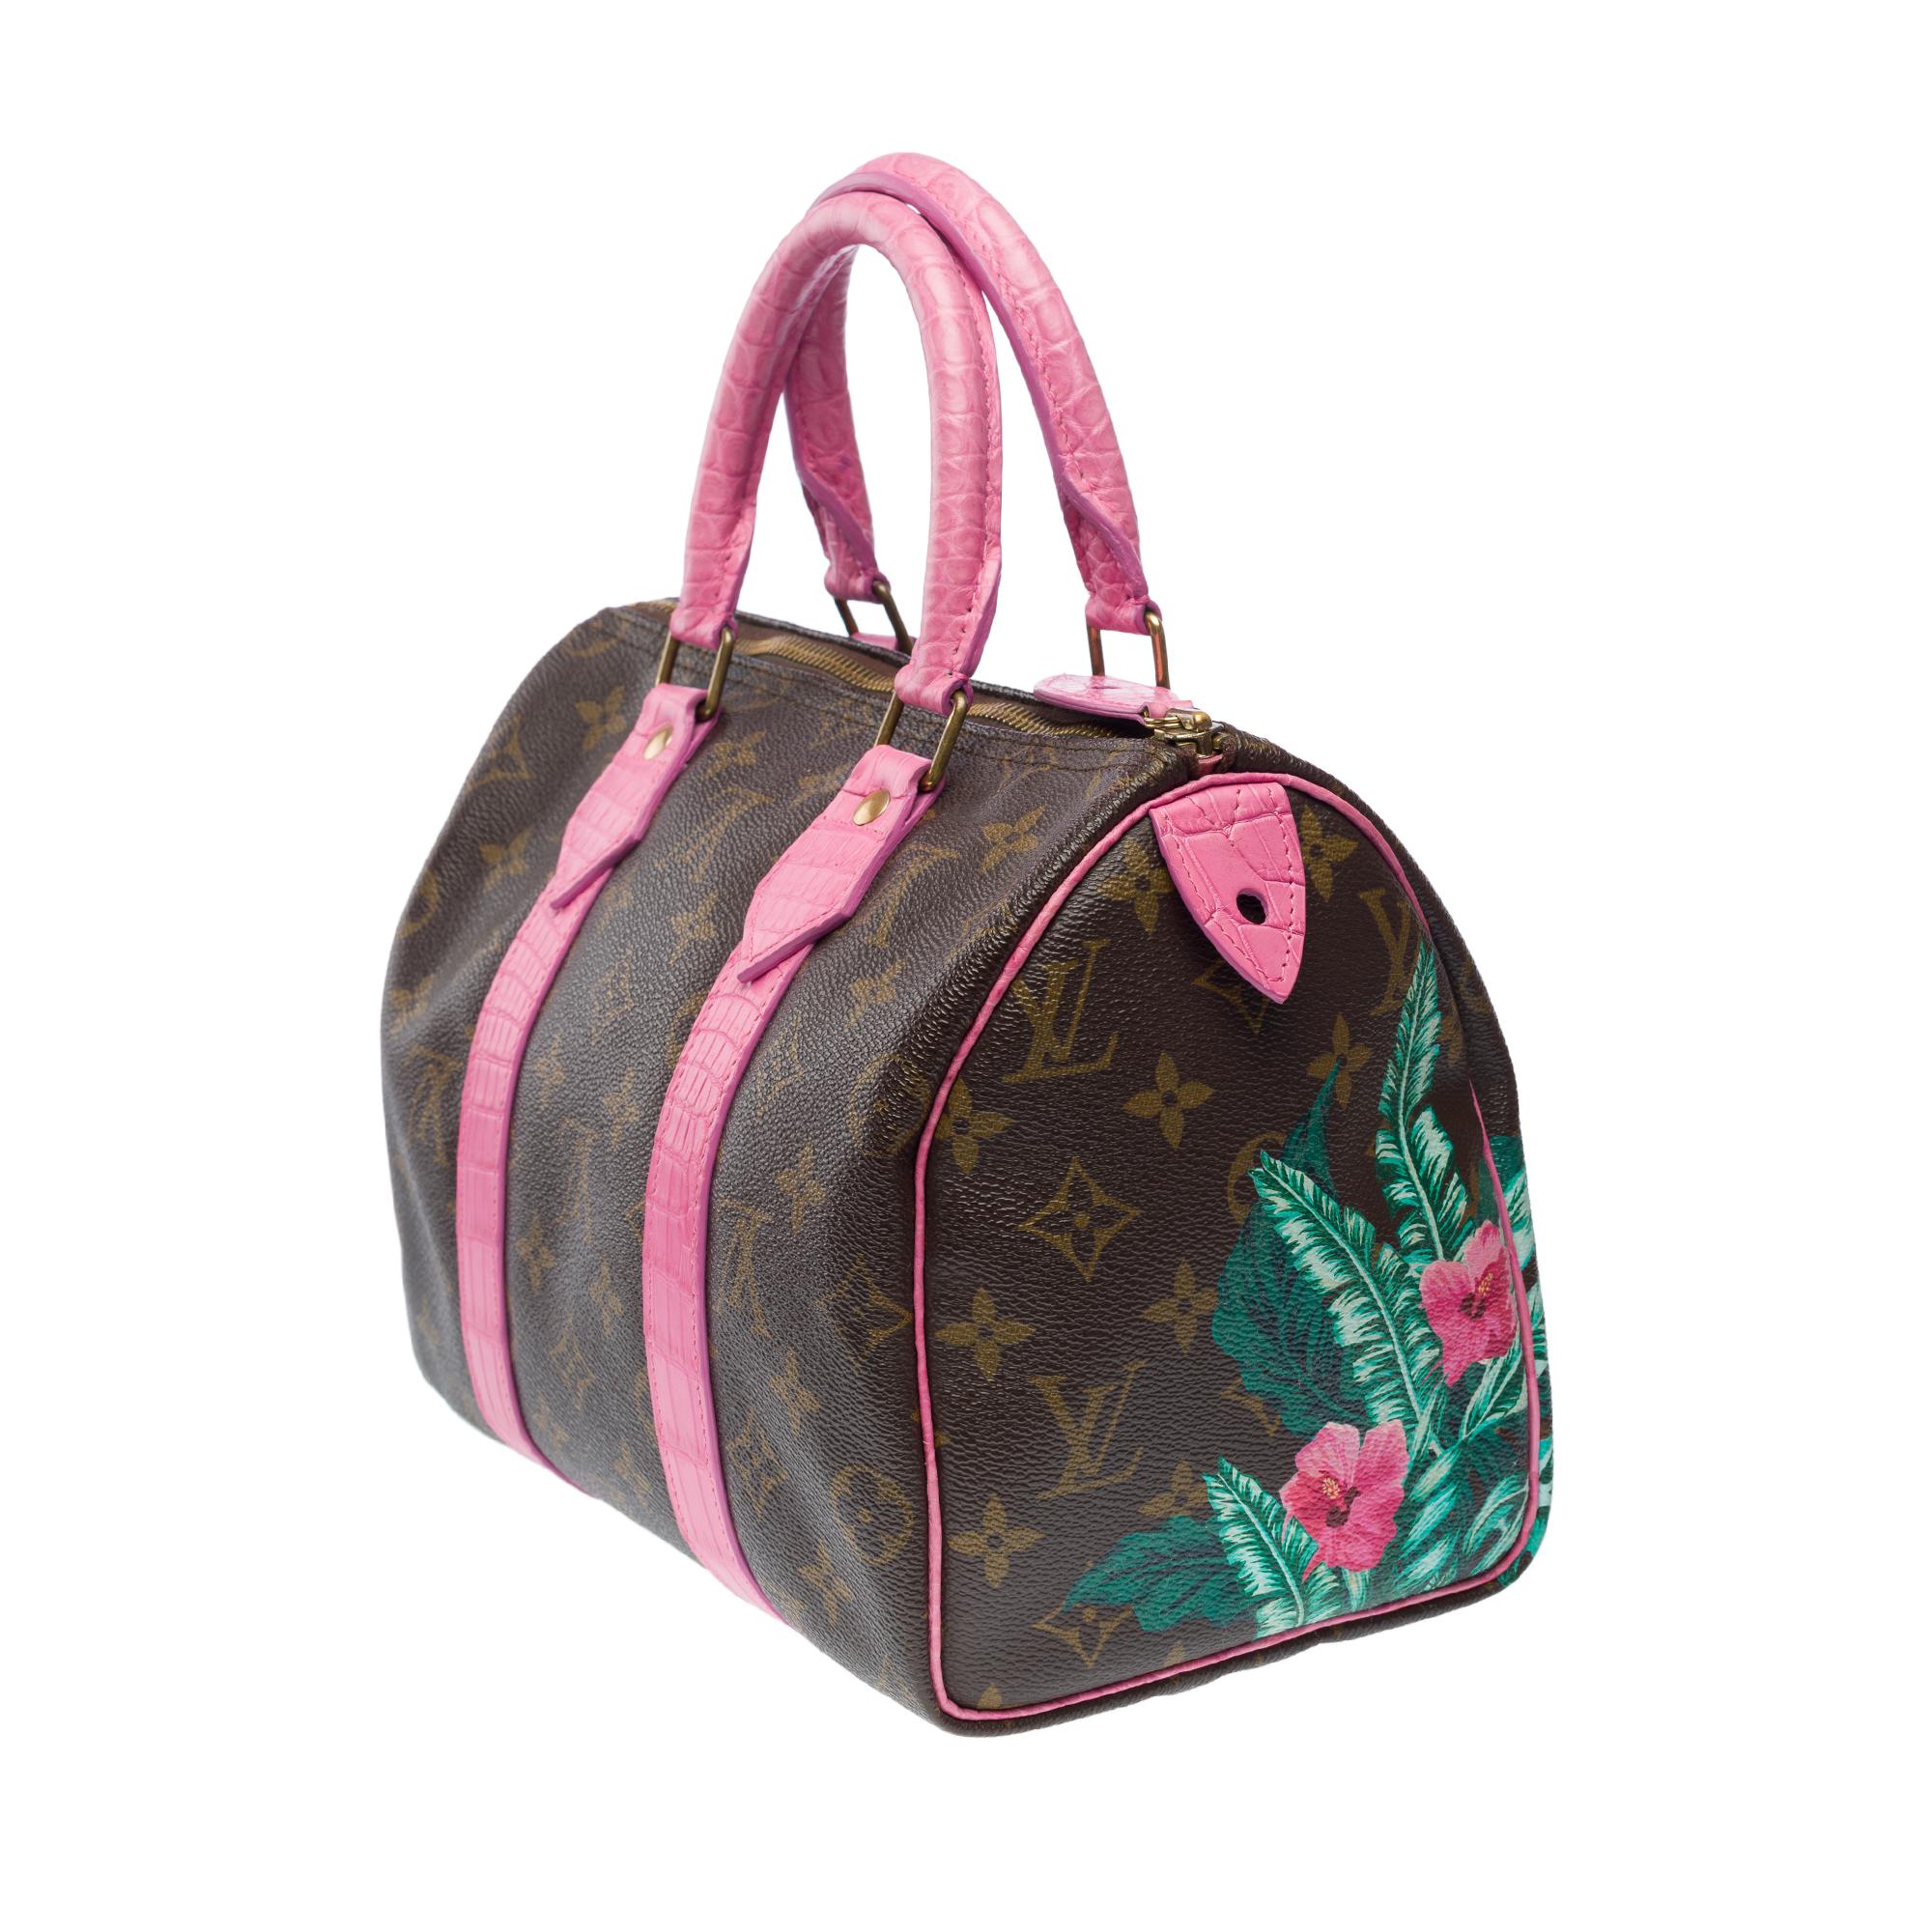 Customized Louis Vuitton Speedy 25 handbag Flowers with Pink Crocodile leather For Sale 1